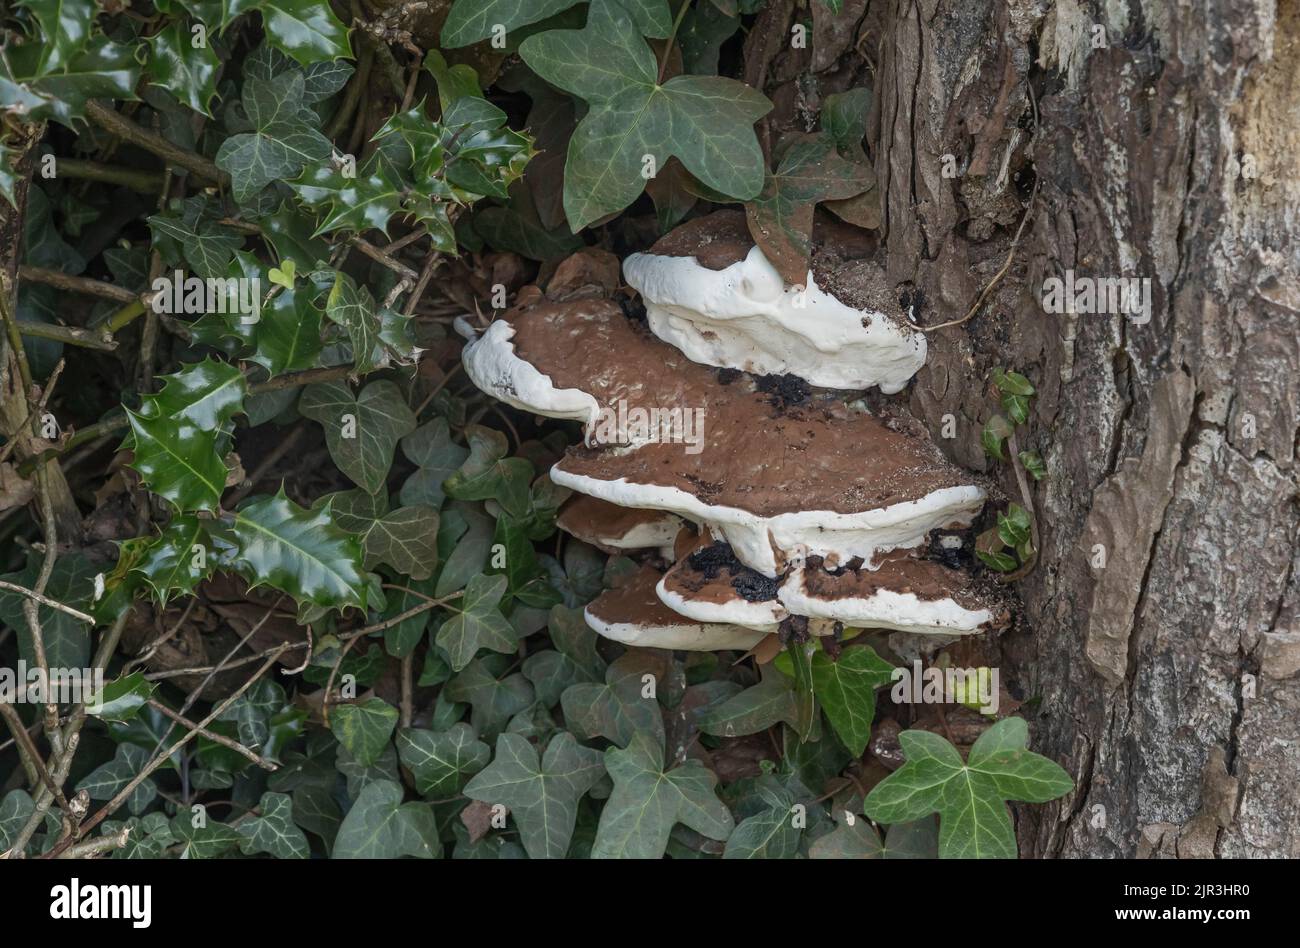 Fungus growing on the side of a tree stump with ivy and holly bushes Stock Photo